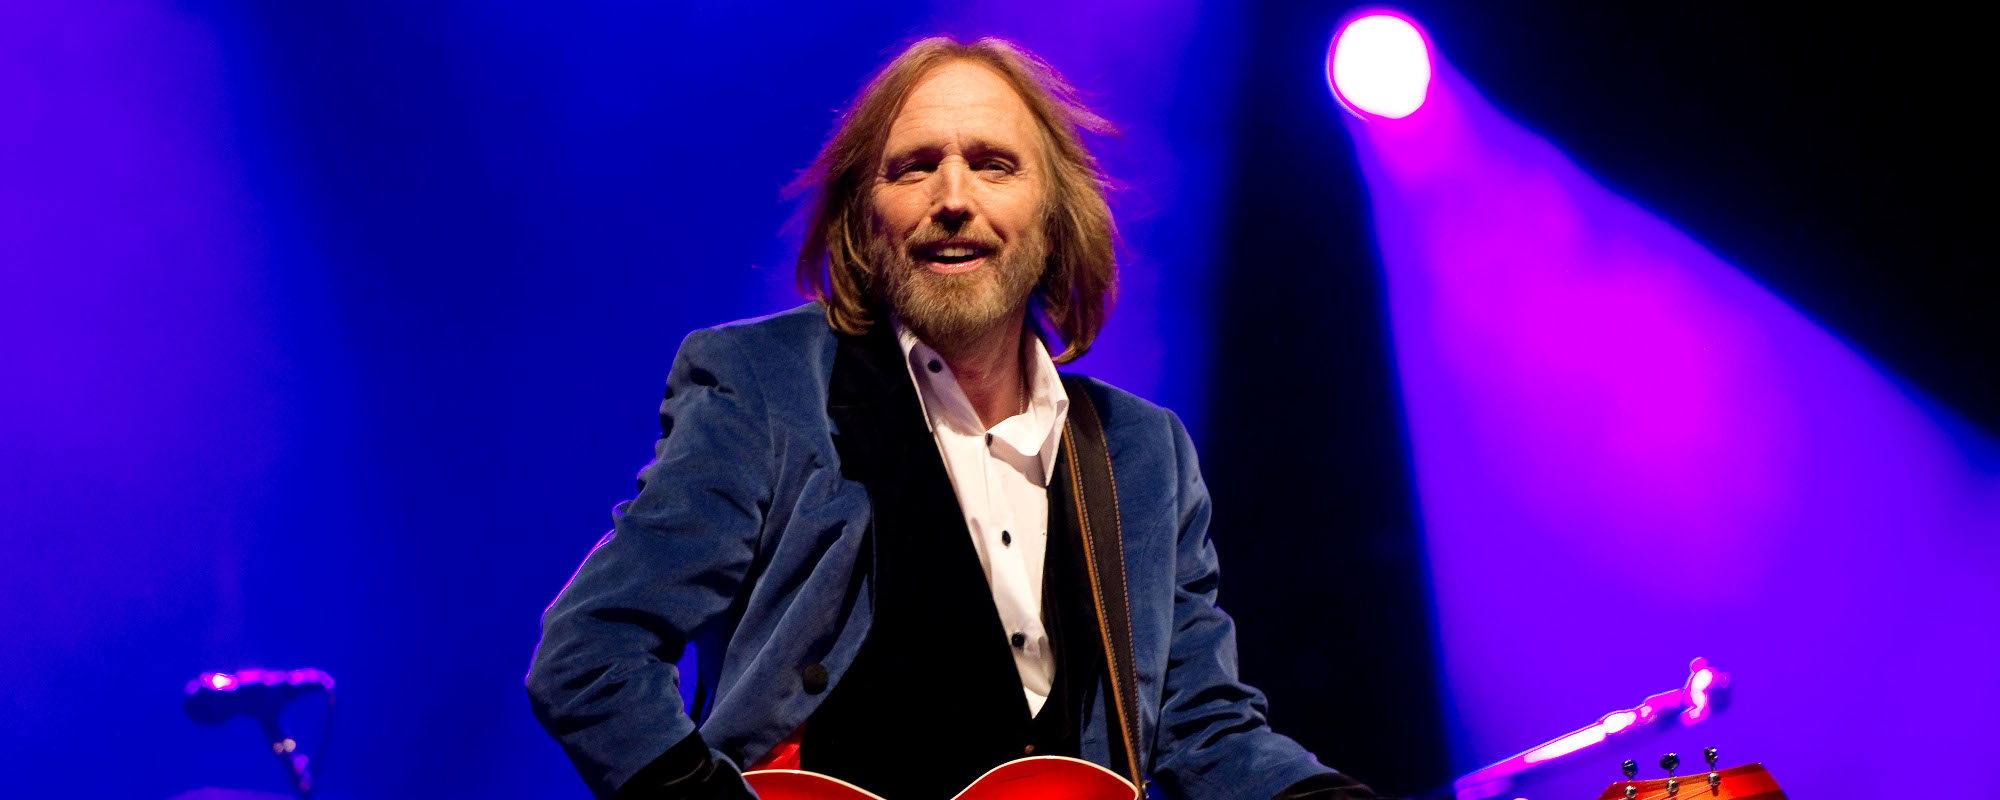 Remember When: Tom Petty Attempts and Then Bails Out on a Concept Album with ‘Southern Accents’